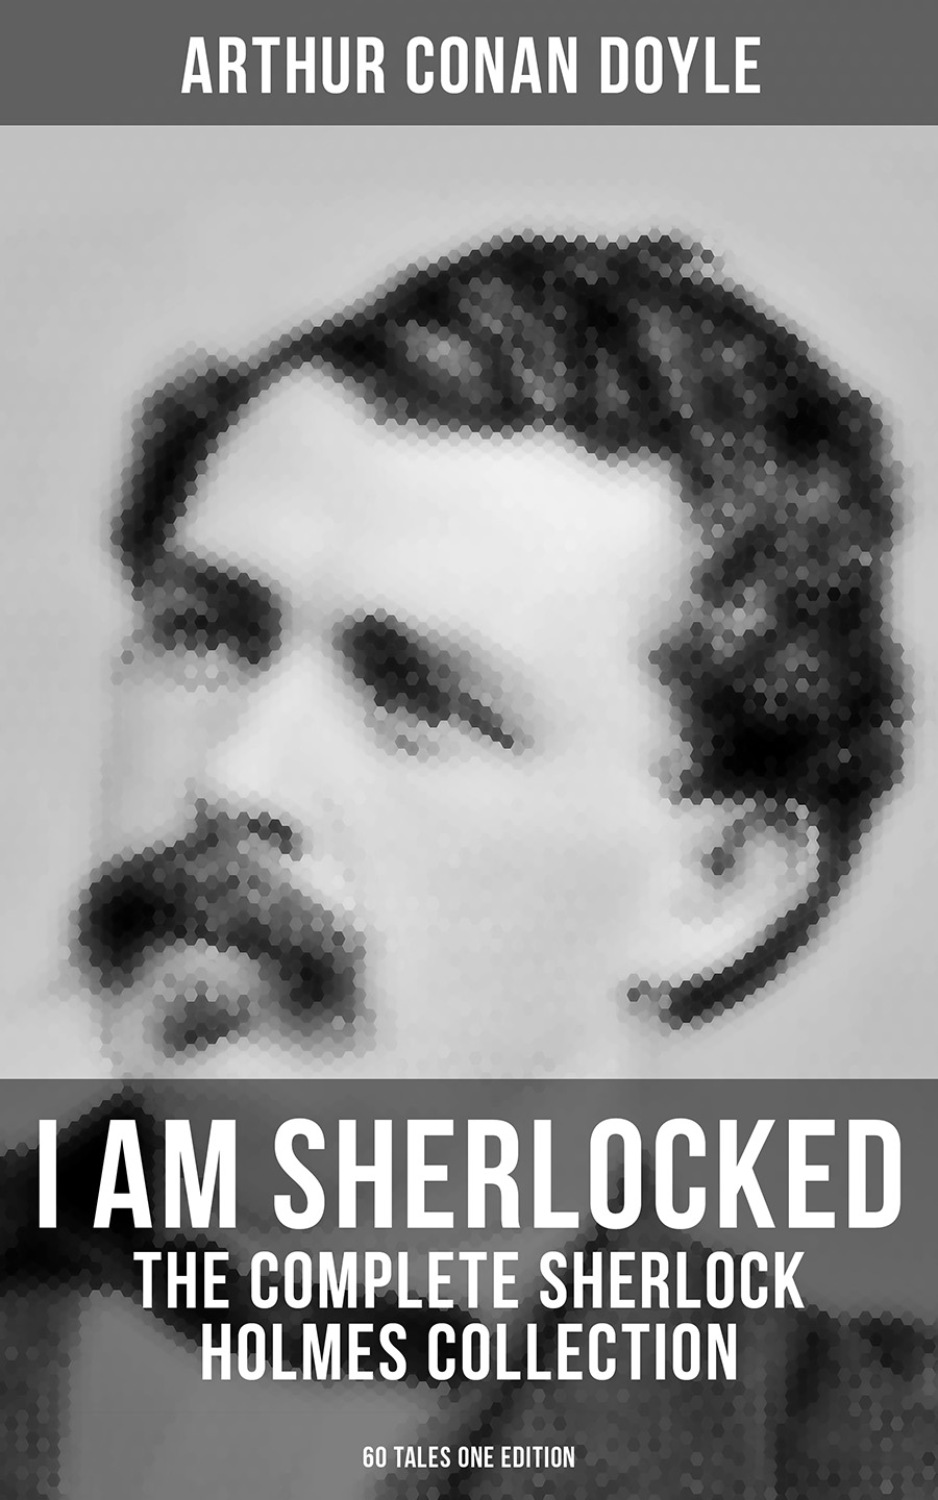 Arthur Conan Doyle I Am Sherlocked The Complete Sherlock Holmes Collection 60 Tales One Edition Including An Intimate Study Of Sherlock Holmes By Conan Doyle Himself Download As Mobi